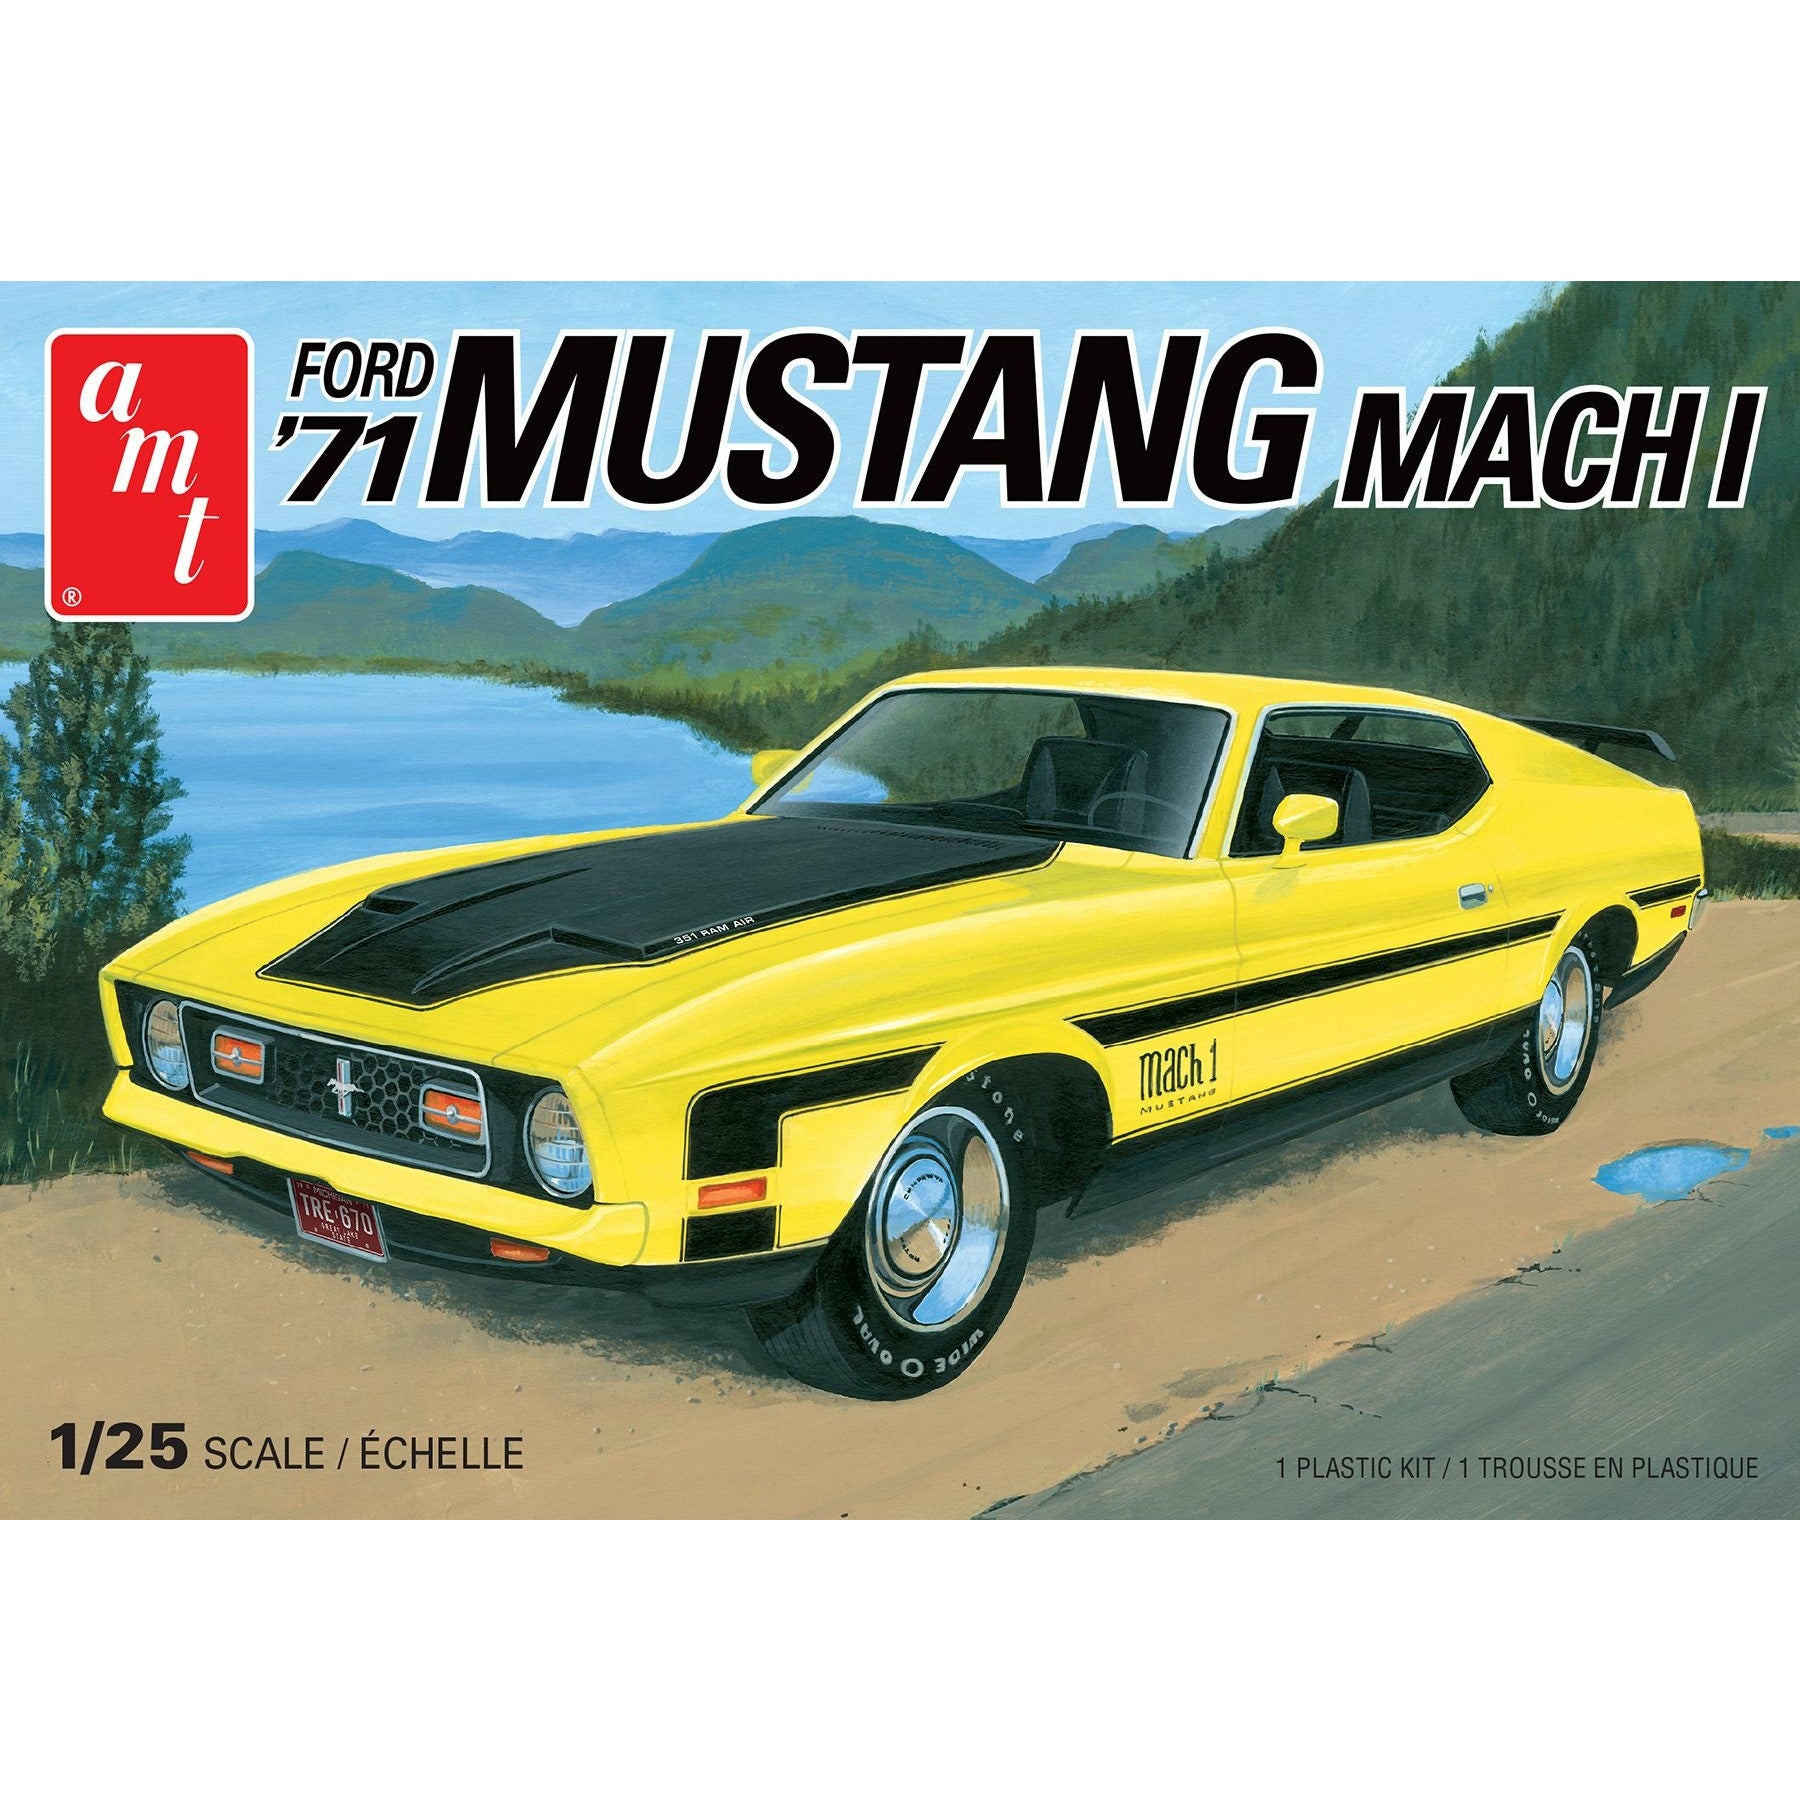 1971 Ford Mustang Mach 1 1/25 #1262 by AMT